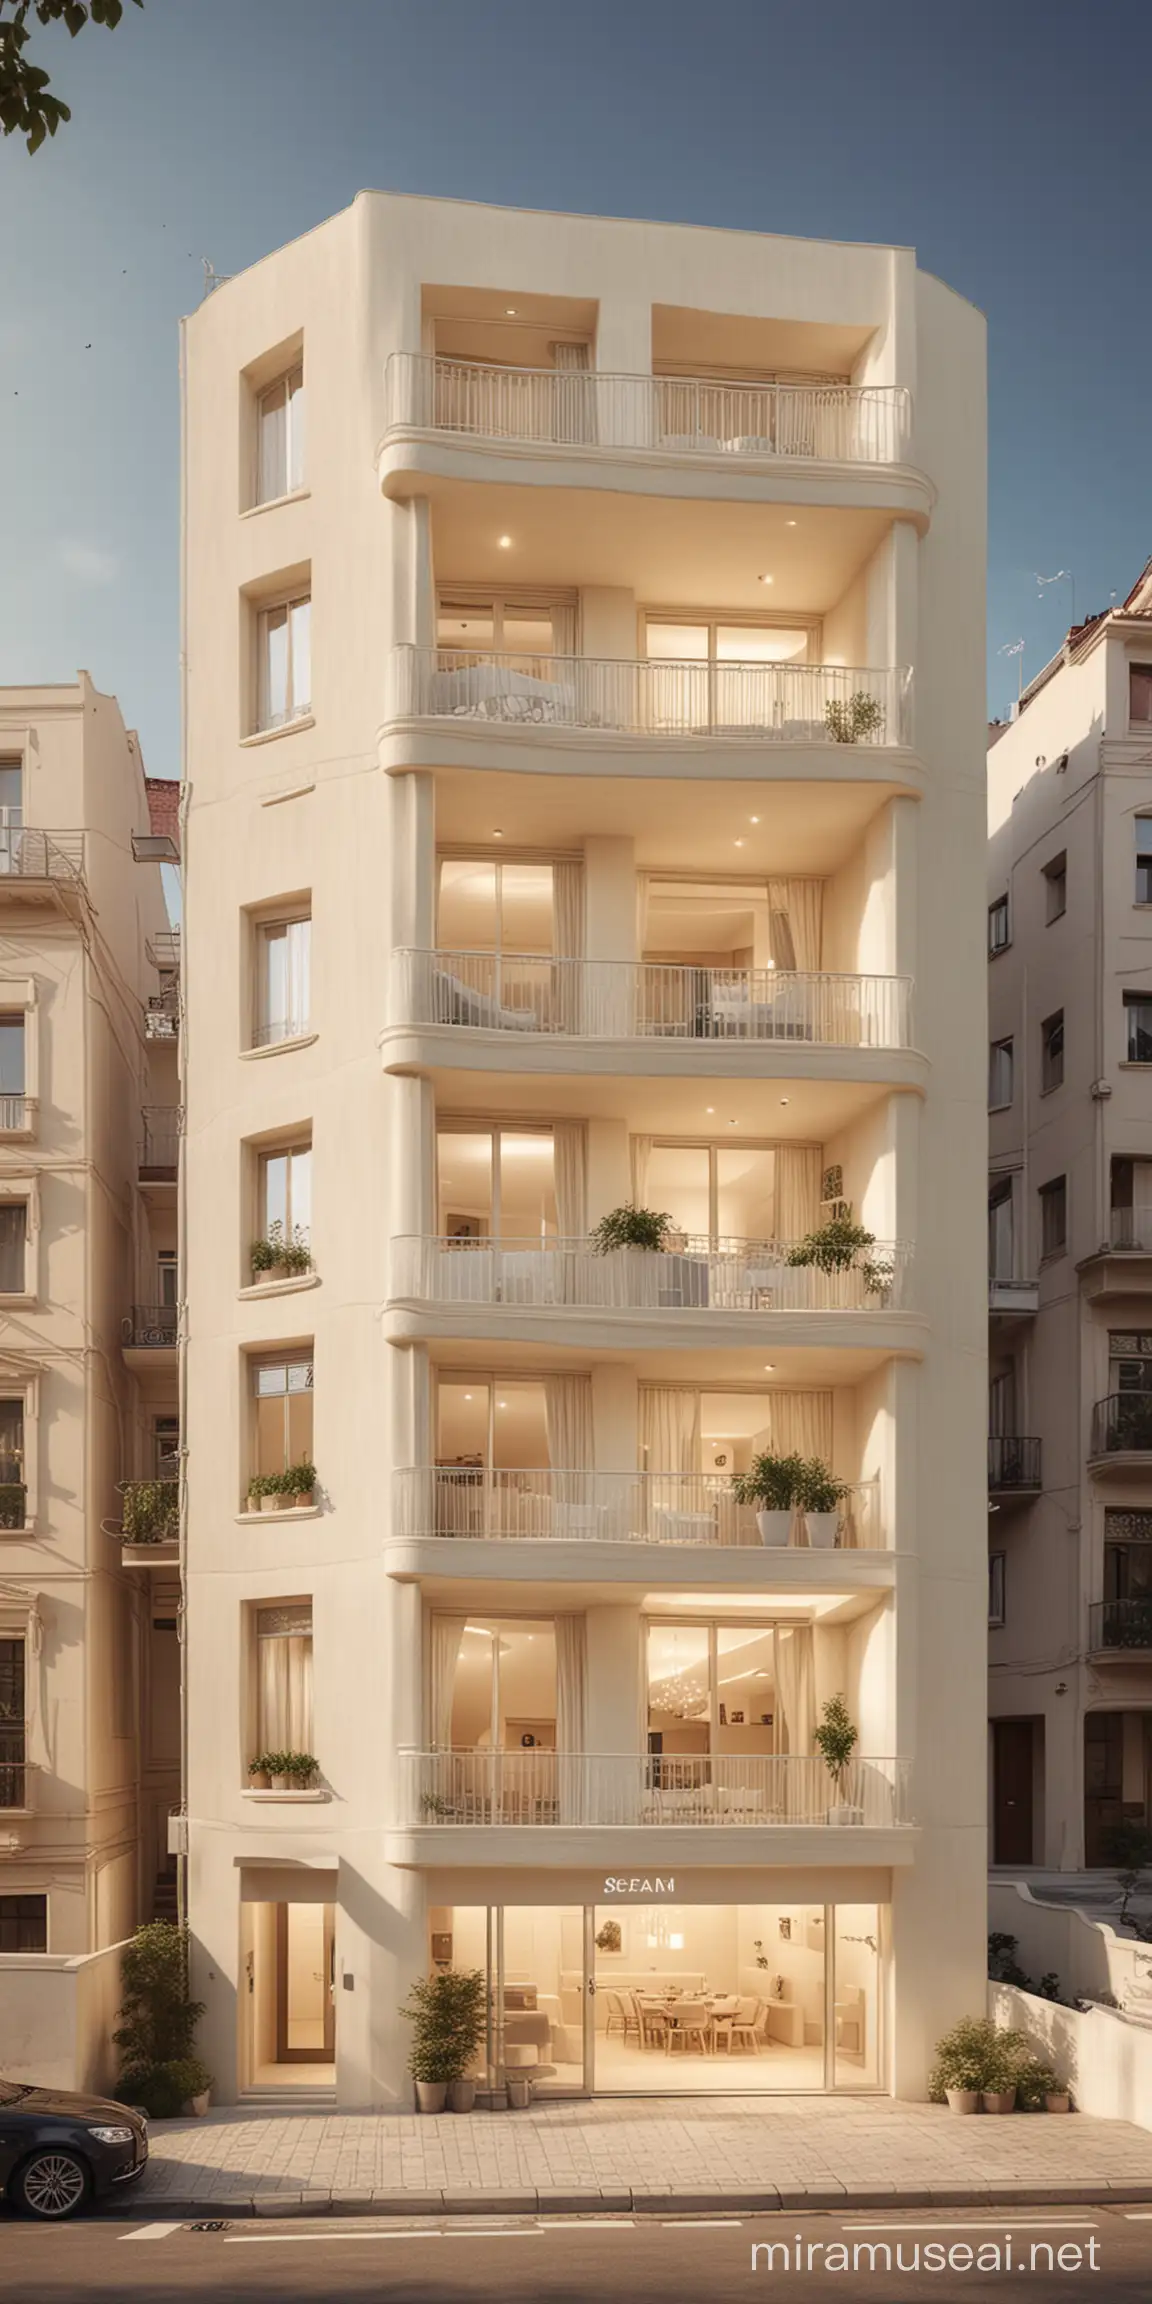 Tranquil CreamColored Apartment Building with Spiritual Design